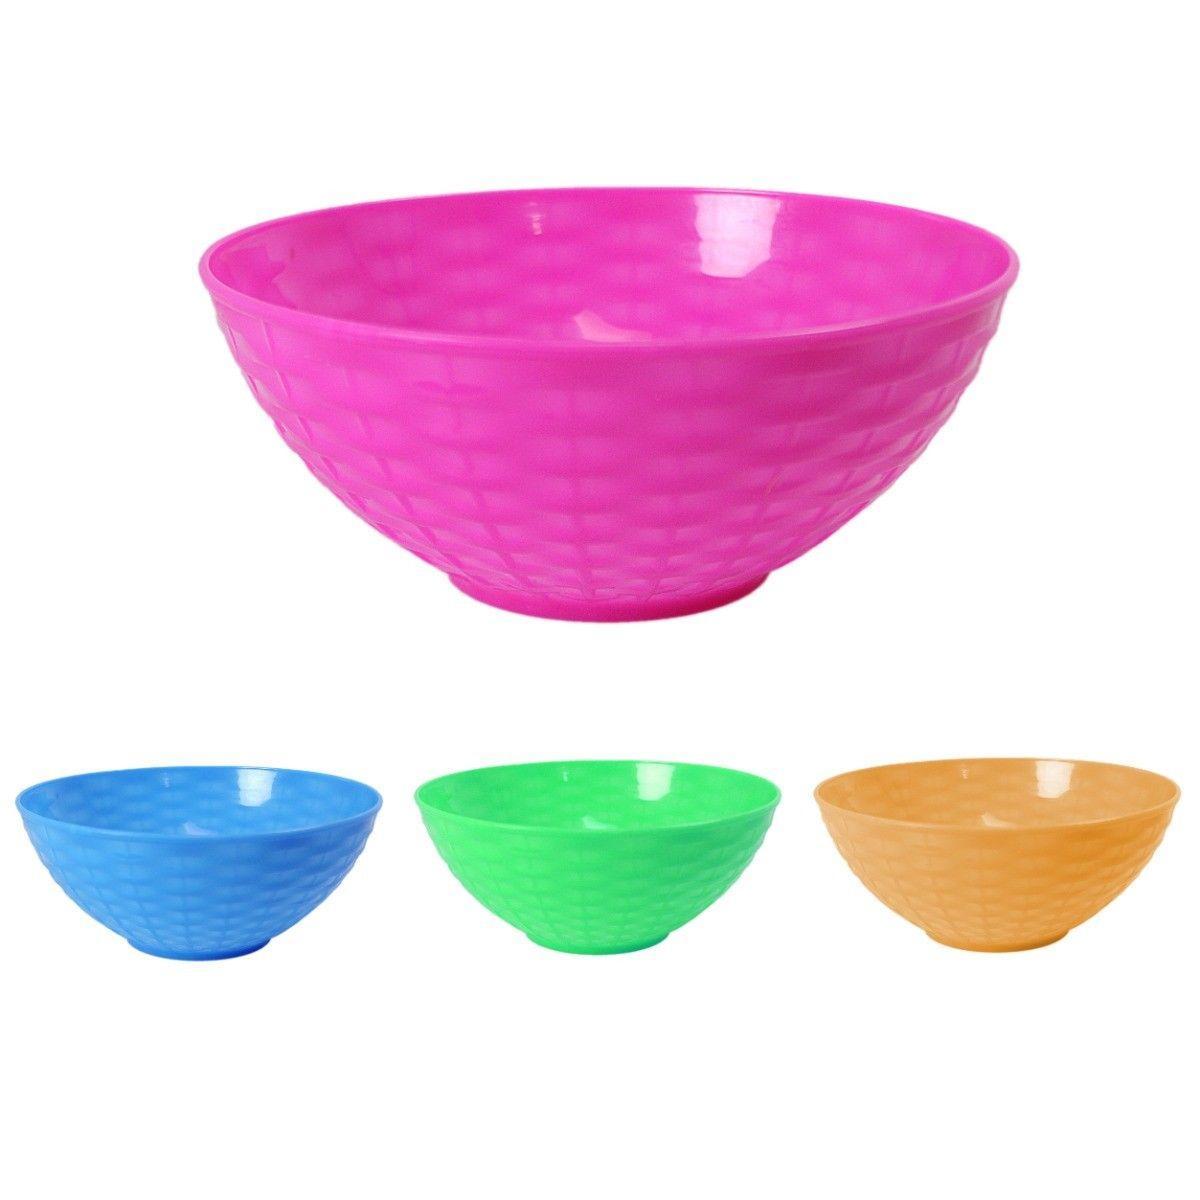 Small Plastic Bowl 14 x 7 cm 0440 (Large Letter Rate)